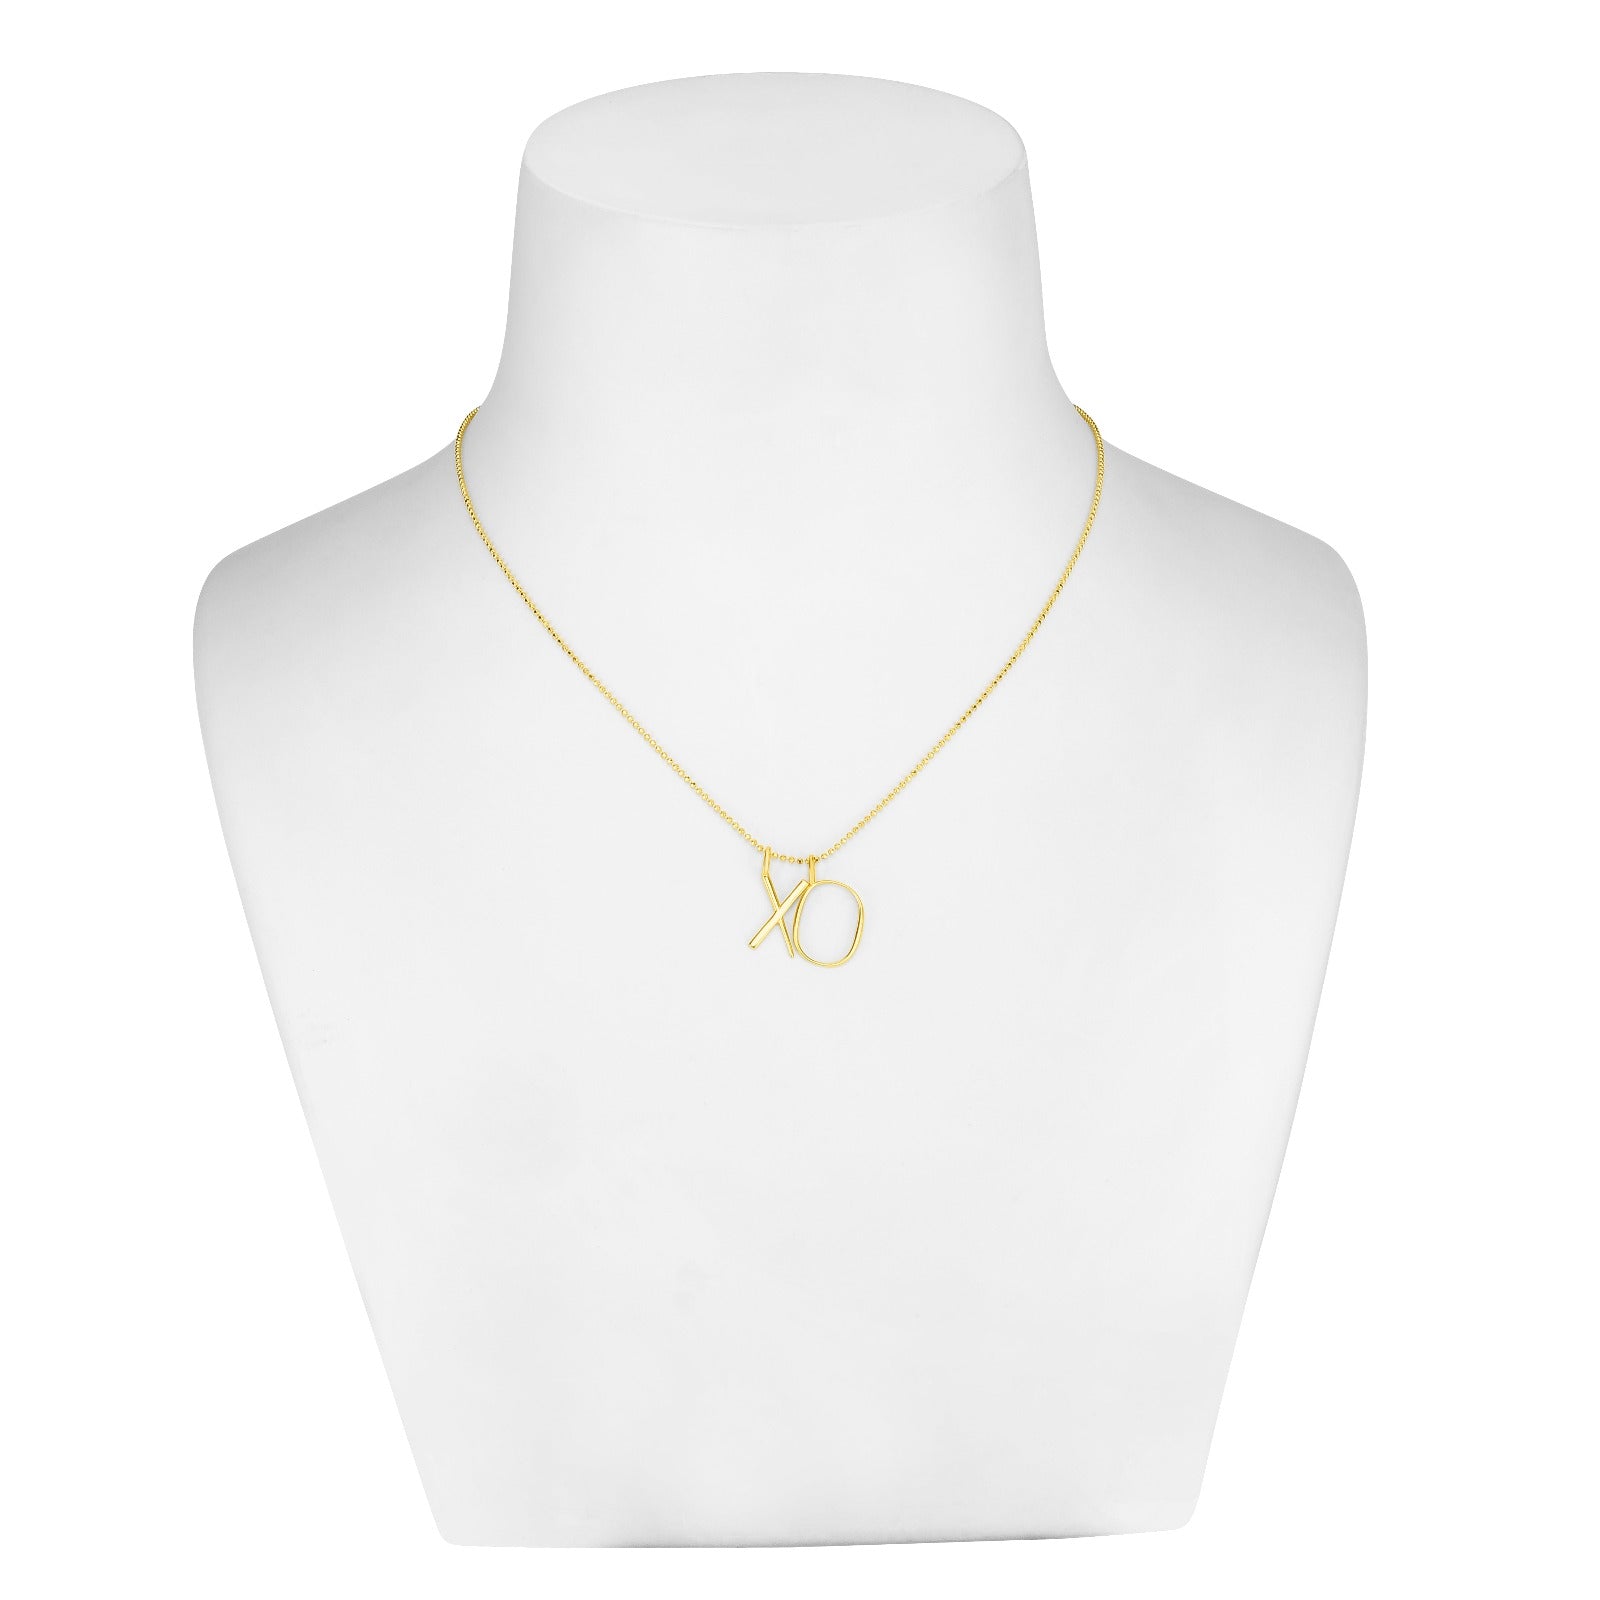 14K yellow gold X and O letter charms styled with the diamond cut bead chain necklace.